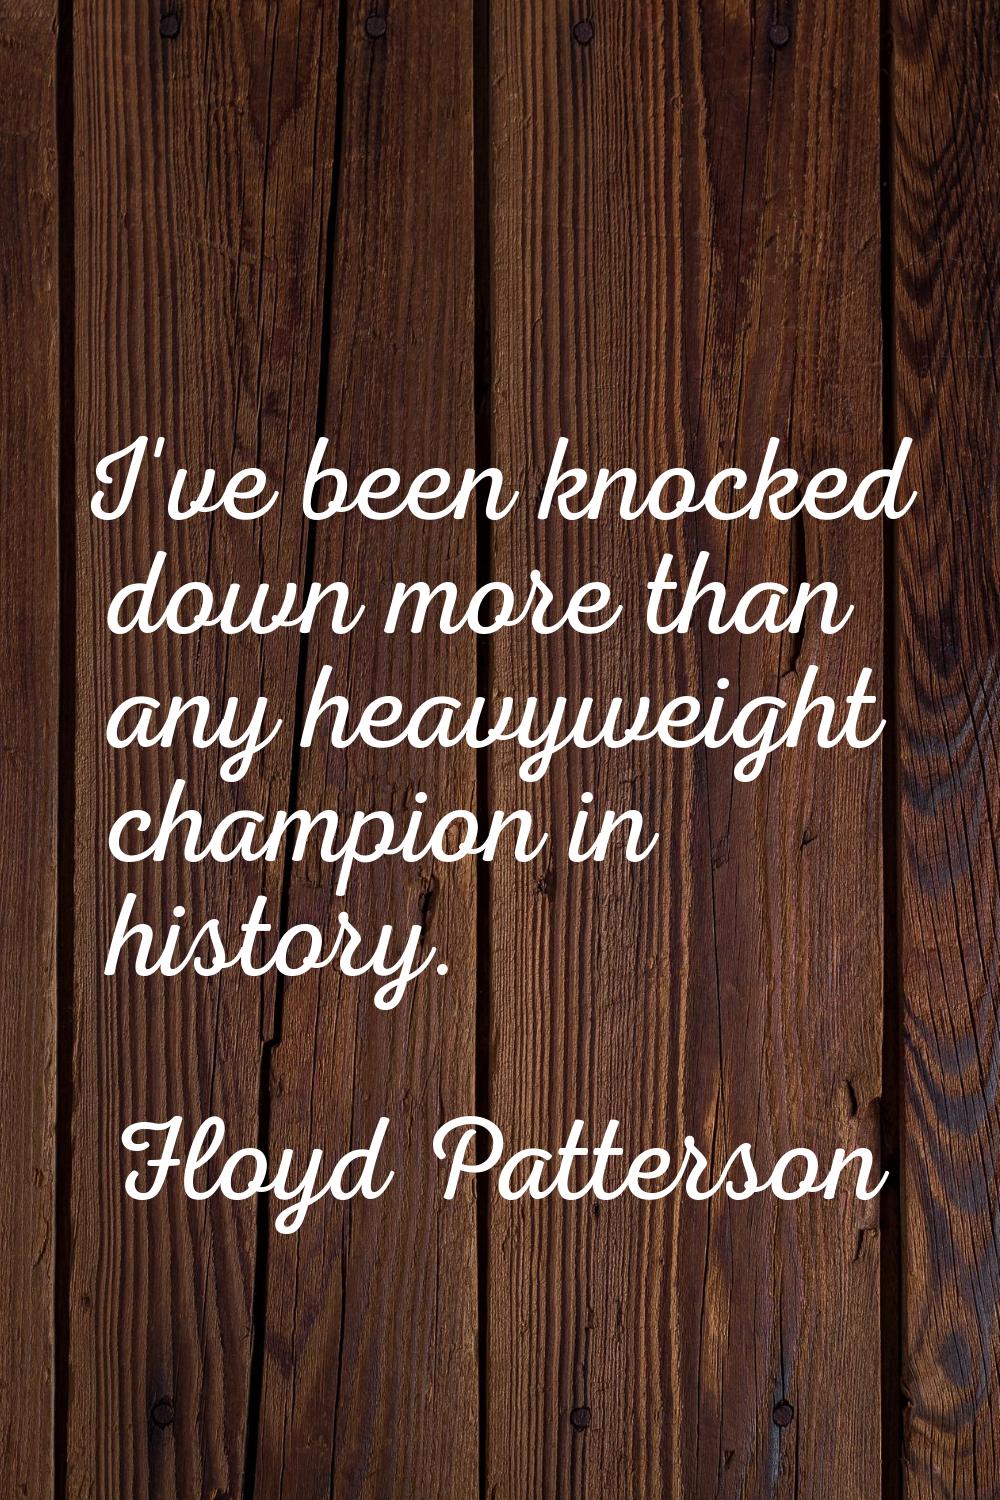 I've been knocked down more than any heavyweight champion in history.